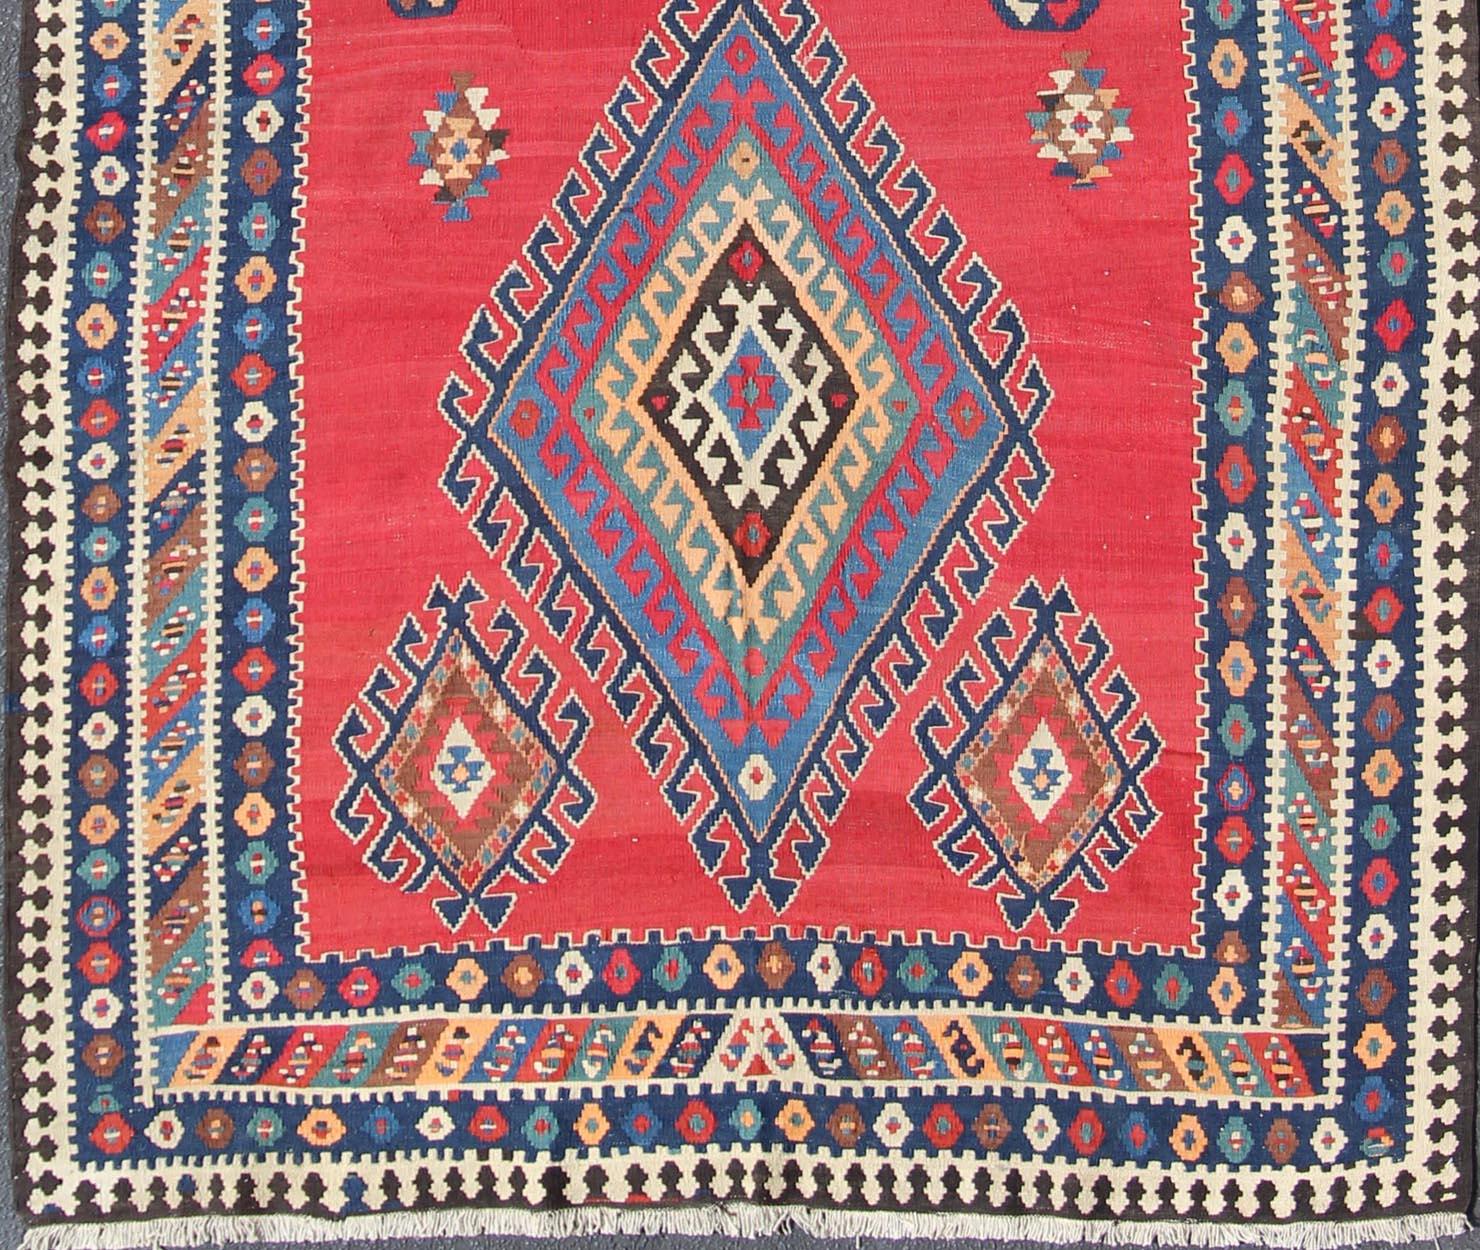 Vibrant color-toned Geometric Design Kilim Runner antique Qashqai Kilim Gallery from Persia, rug 19-0402, country of origin / type: Iran / Kilim, circa 1920

Featuring a geometric diamond medallion design, with complementary geometric motifs